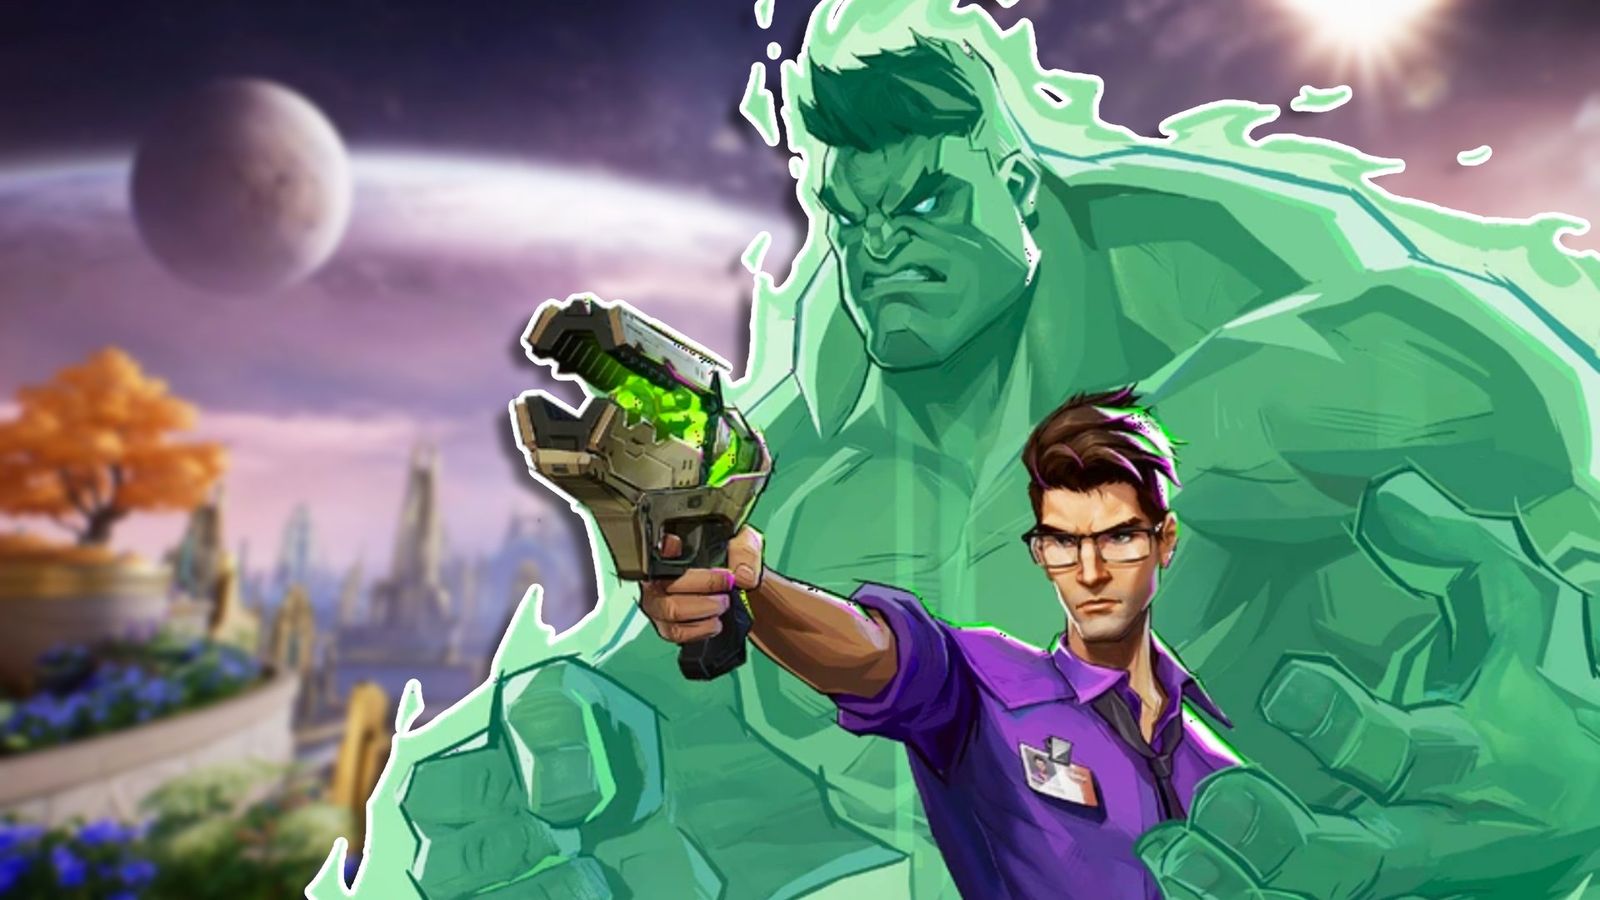 Bruce Banner aiming his Gamma Ray Gun, an image of the Hulk from Marvel Rivals standing behind him.